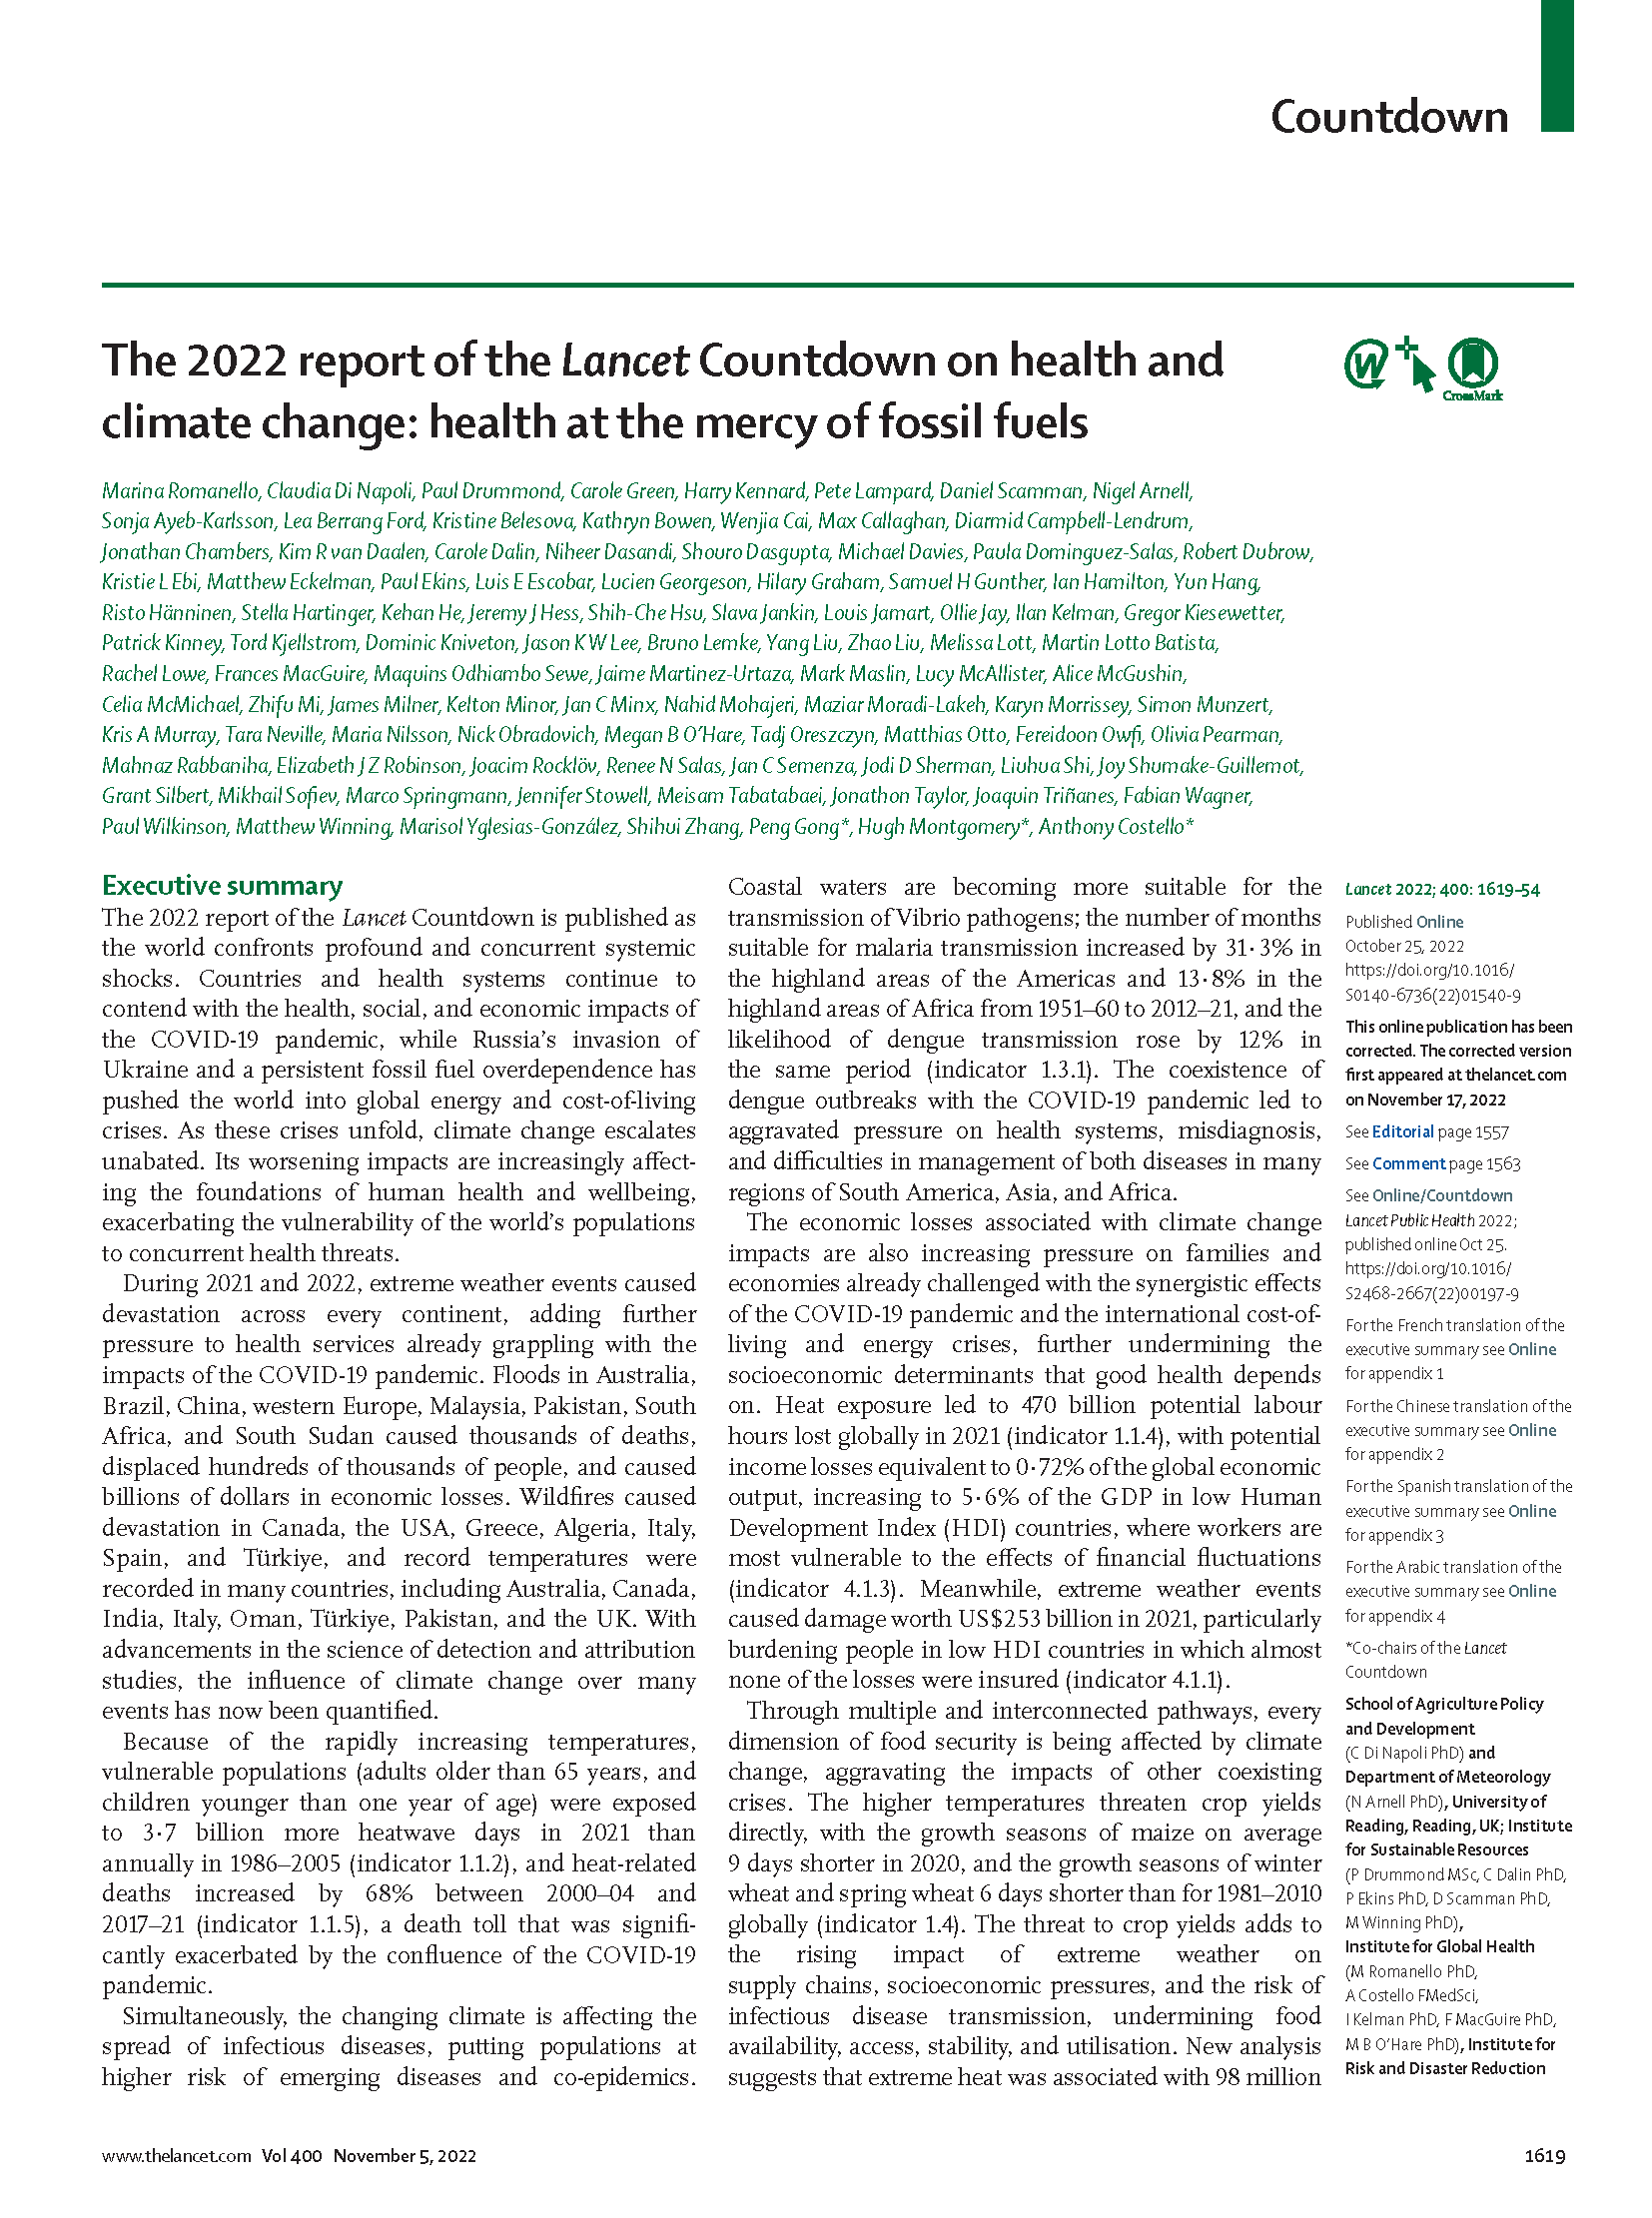 Cover page for The 2022 Report of the Lancet Countdown on Health and Climate Change: Health at the mercy of fossil fuels